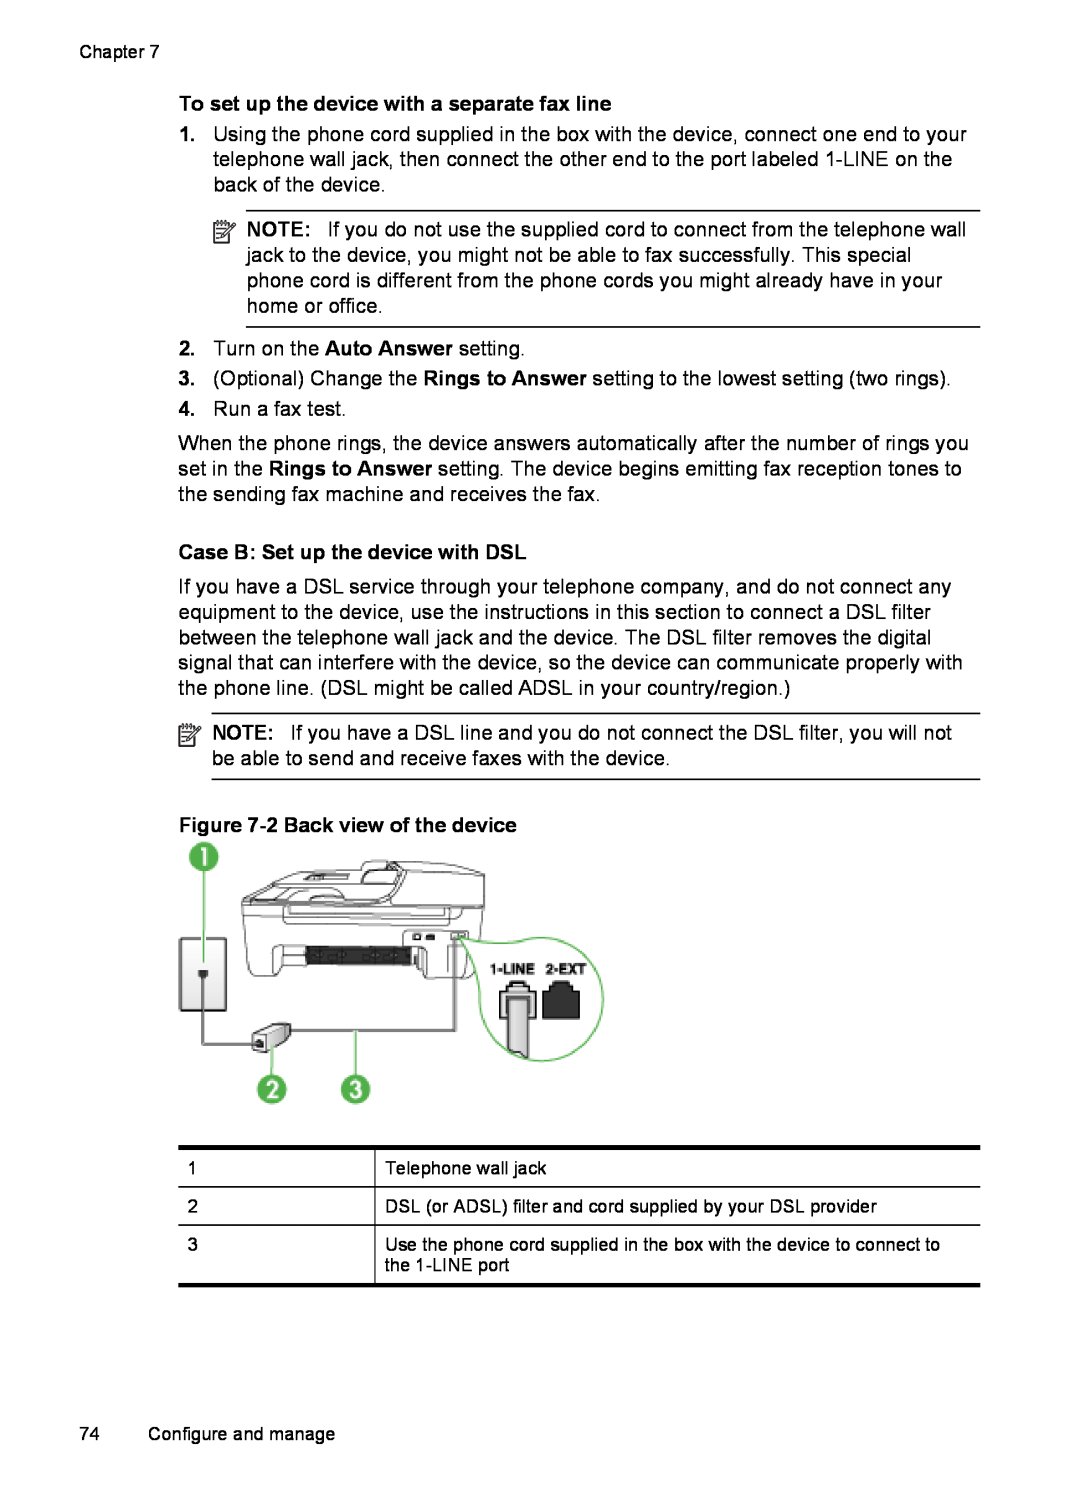 HP J4540 manual To set up the device with a separate fax line, Case B Set up the device with DSL, 2 Back view of the device 